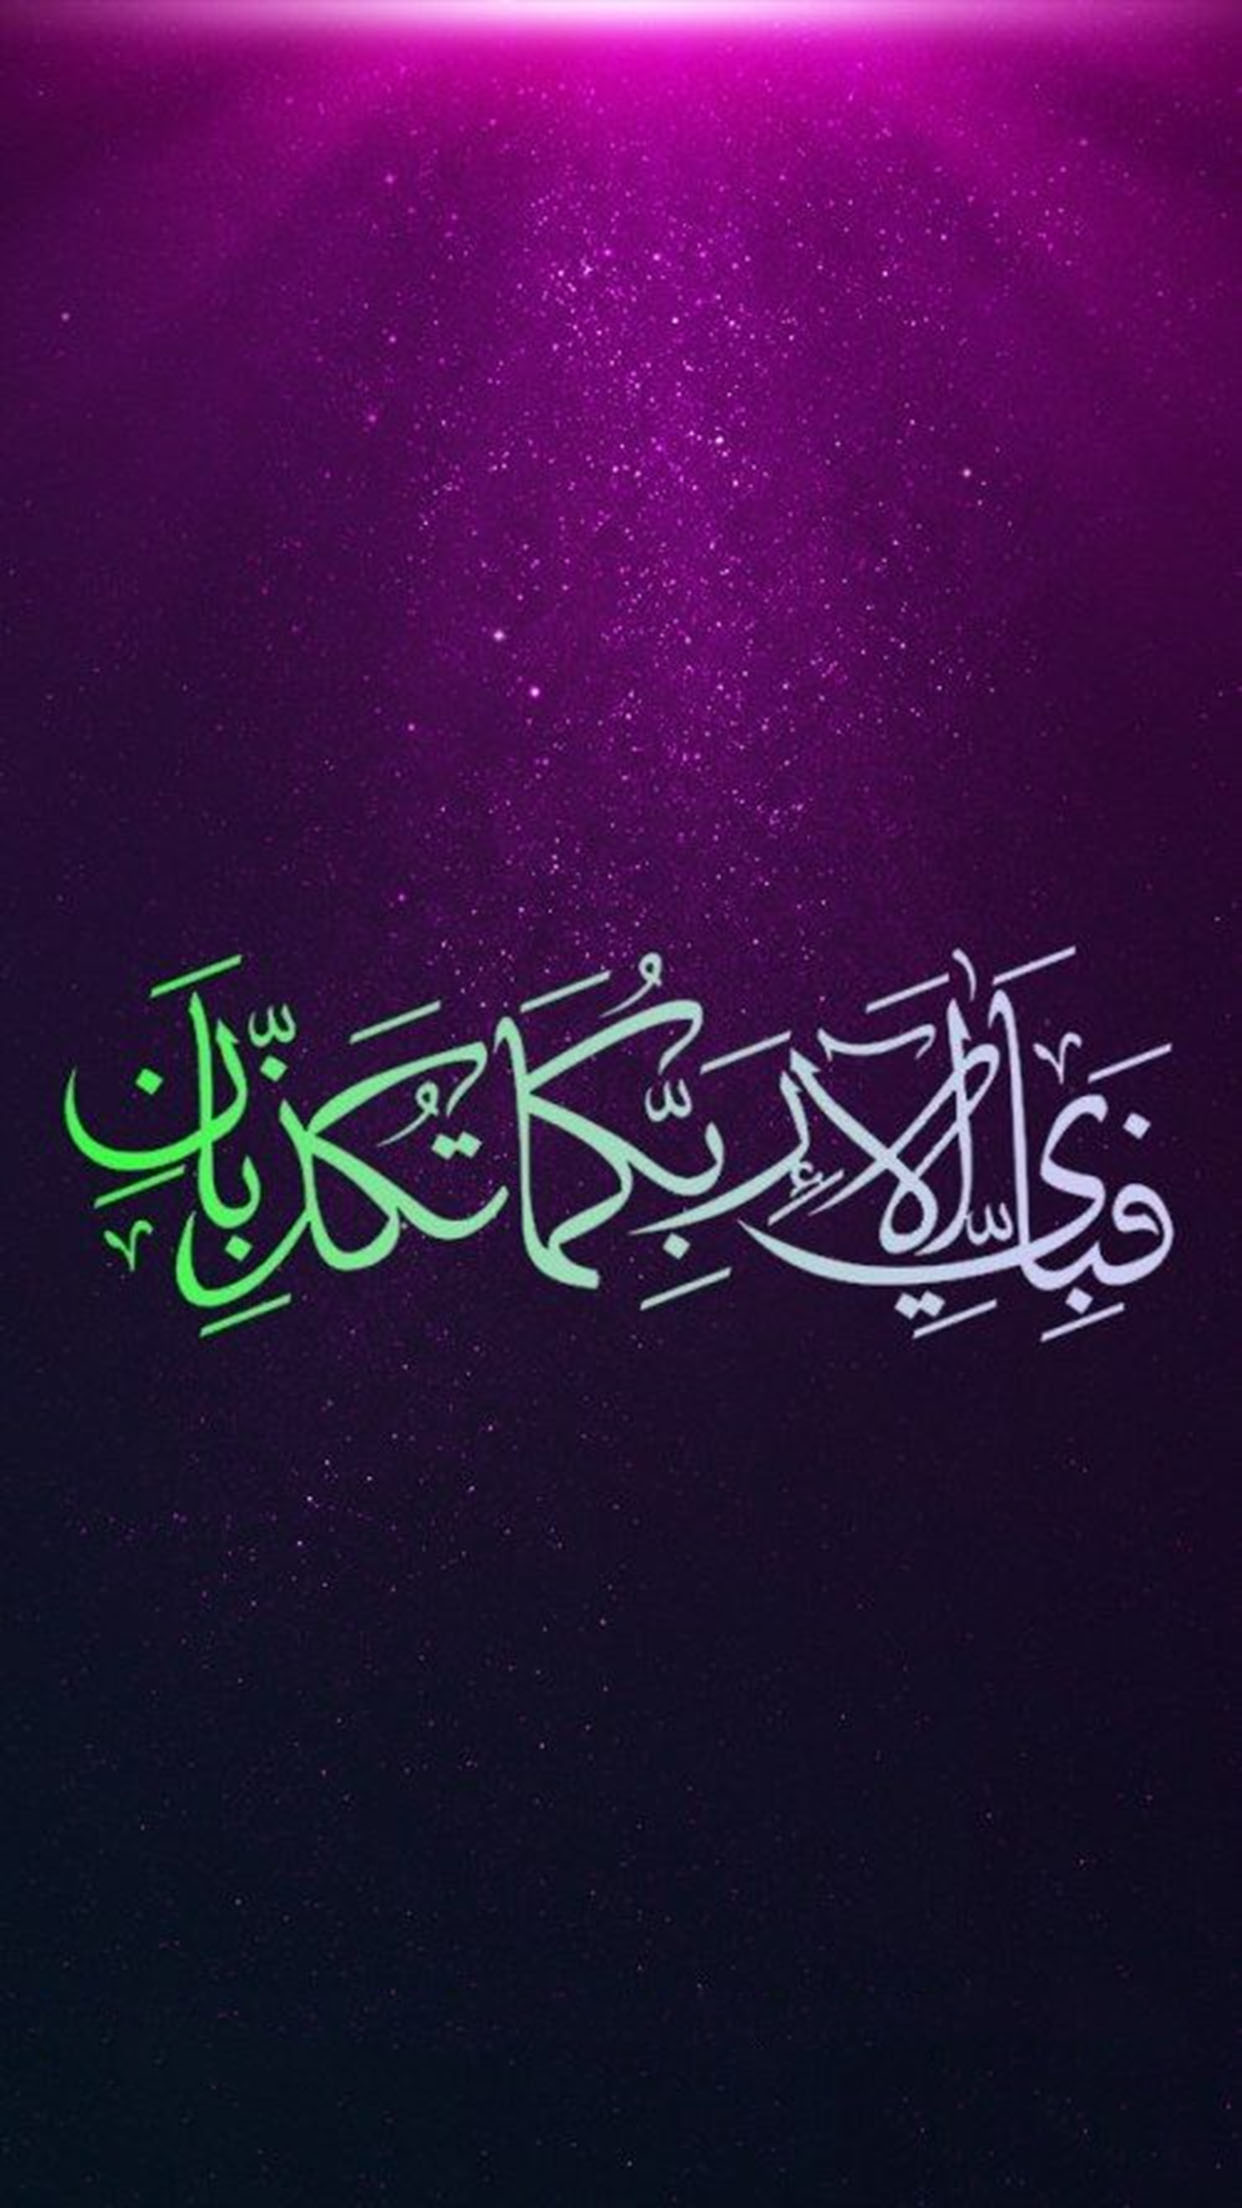 1242x2208 Calligraphie-arabe-Calligraphie-arabe-3-3Wallpapers-iPhone-Parallax